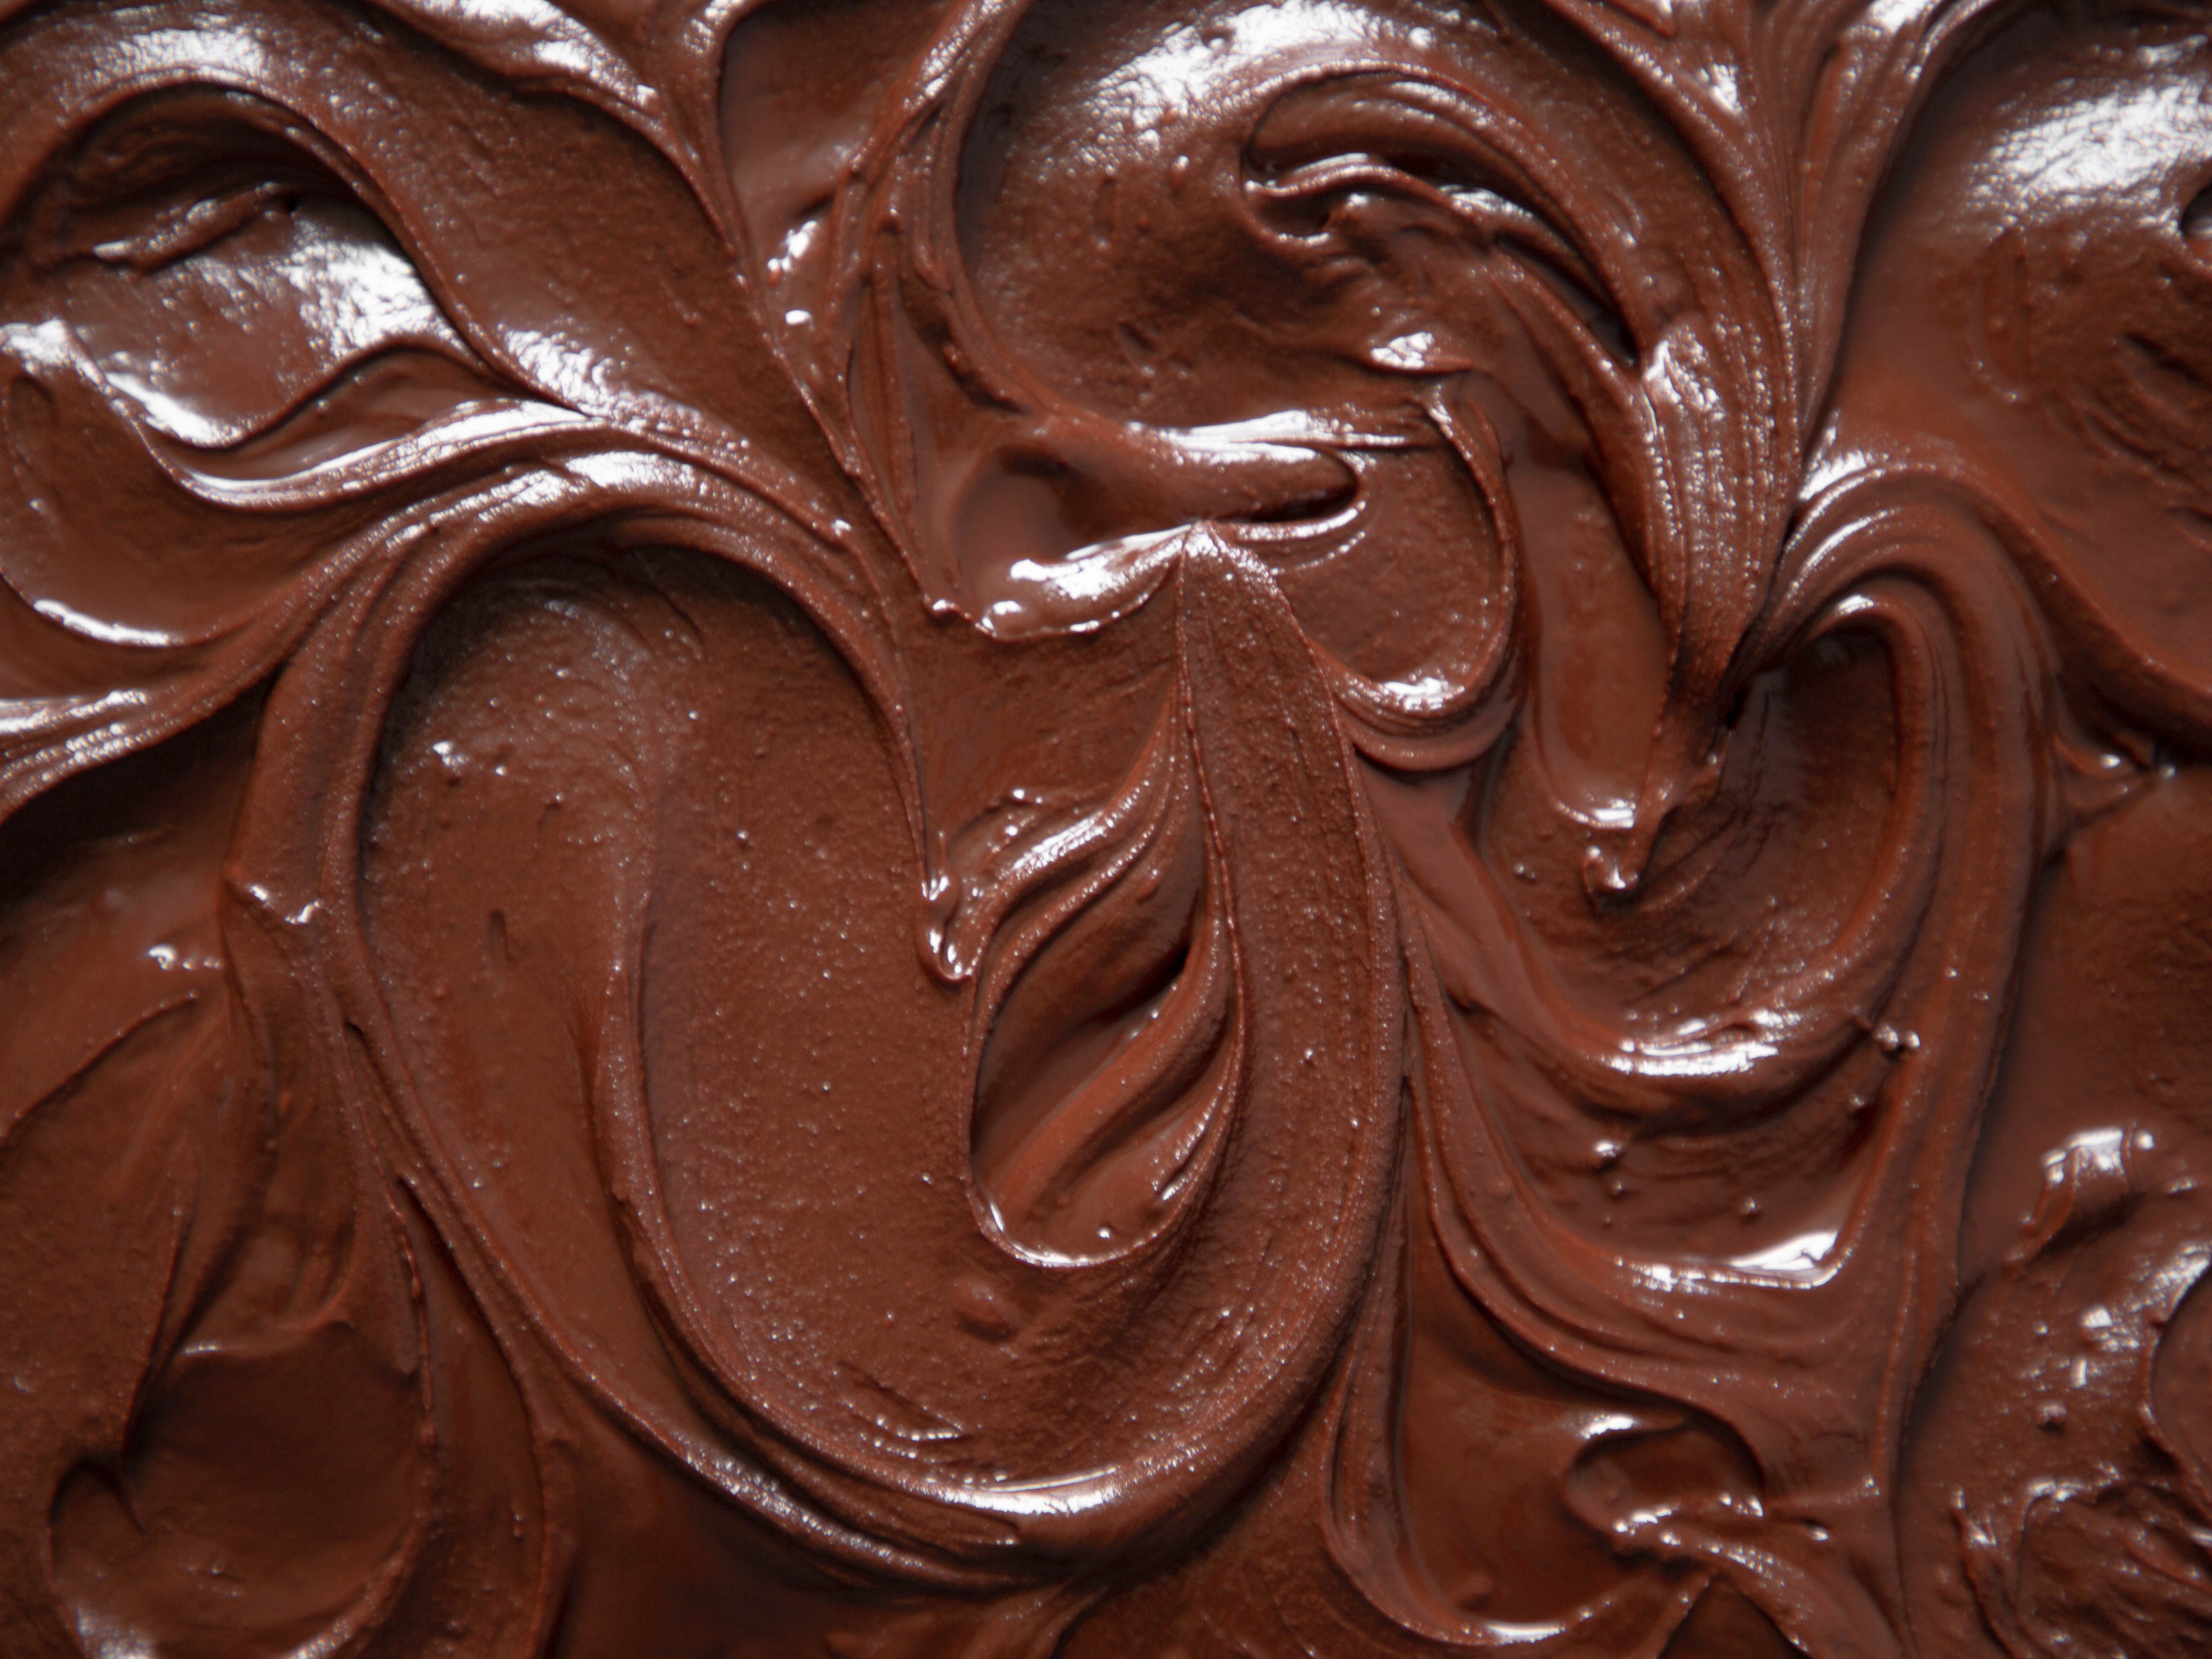 Close up showing of chocolate fudge icing, with swirls decoration